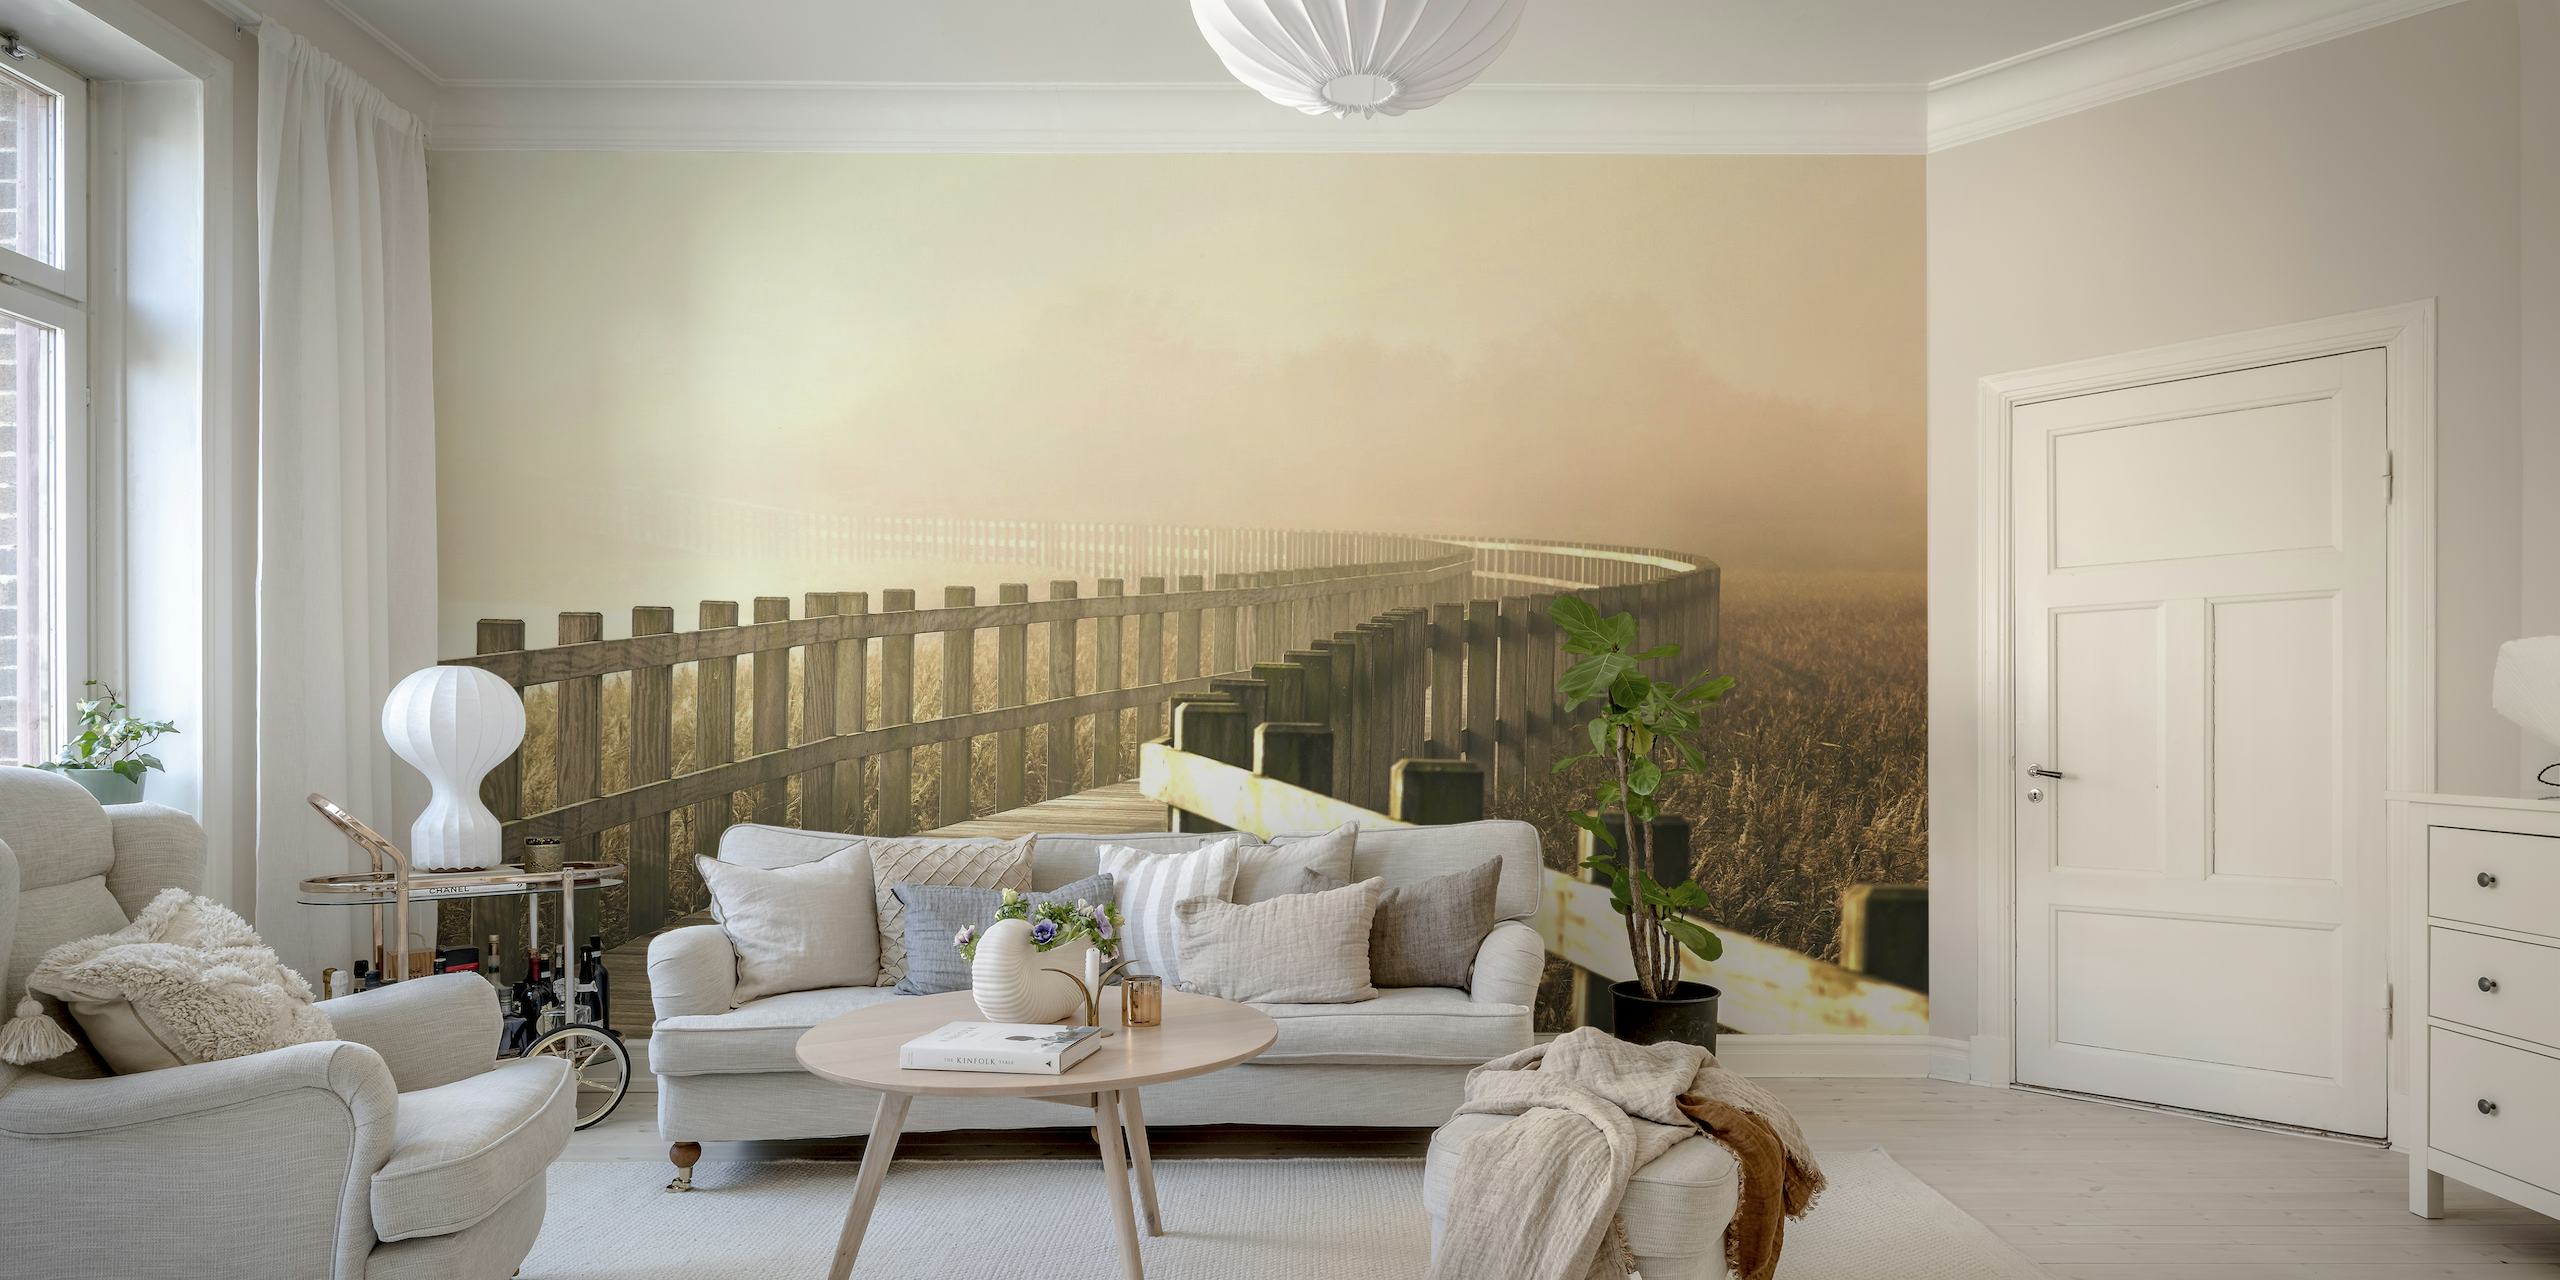 A serene wall mural depicting a sunlit path through a misty landscape, evoking peace and optimism.